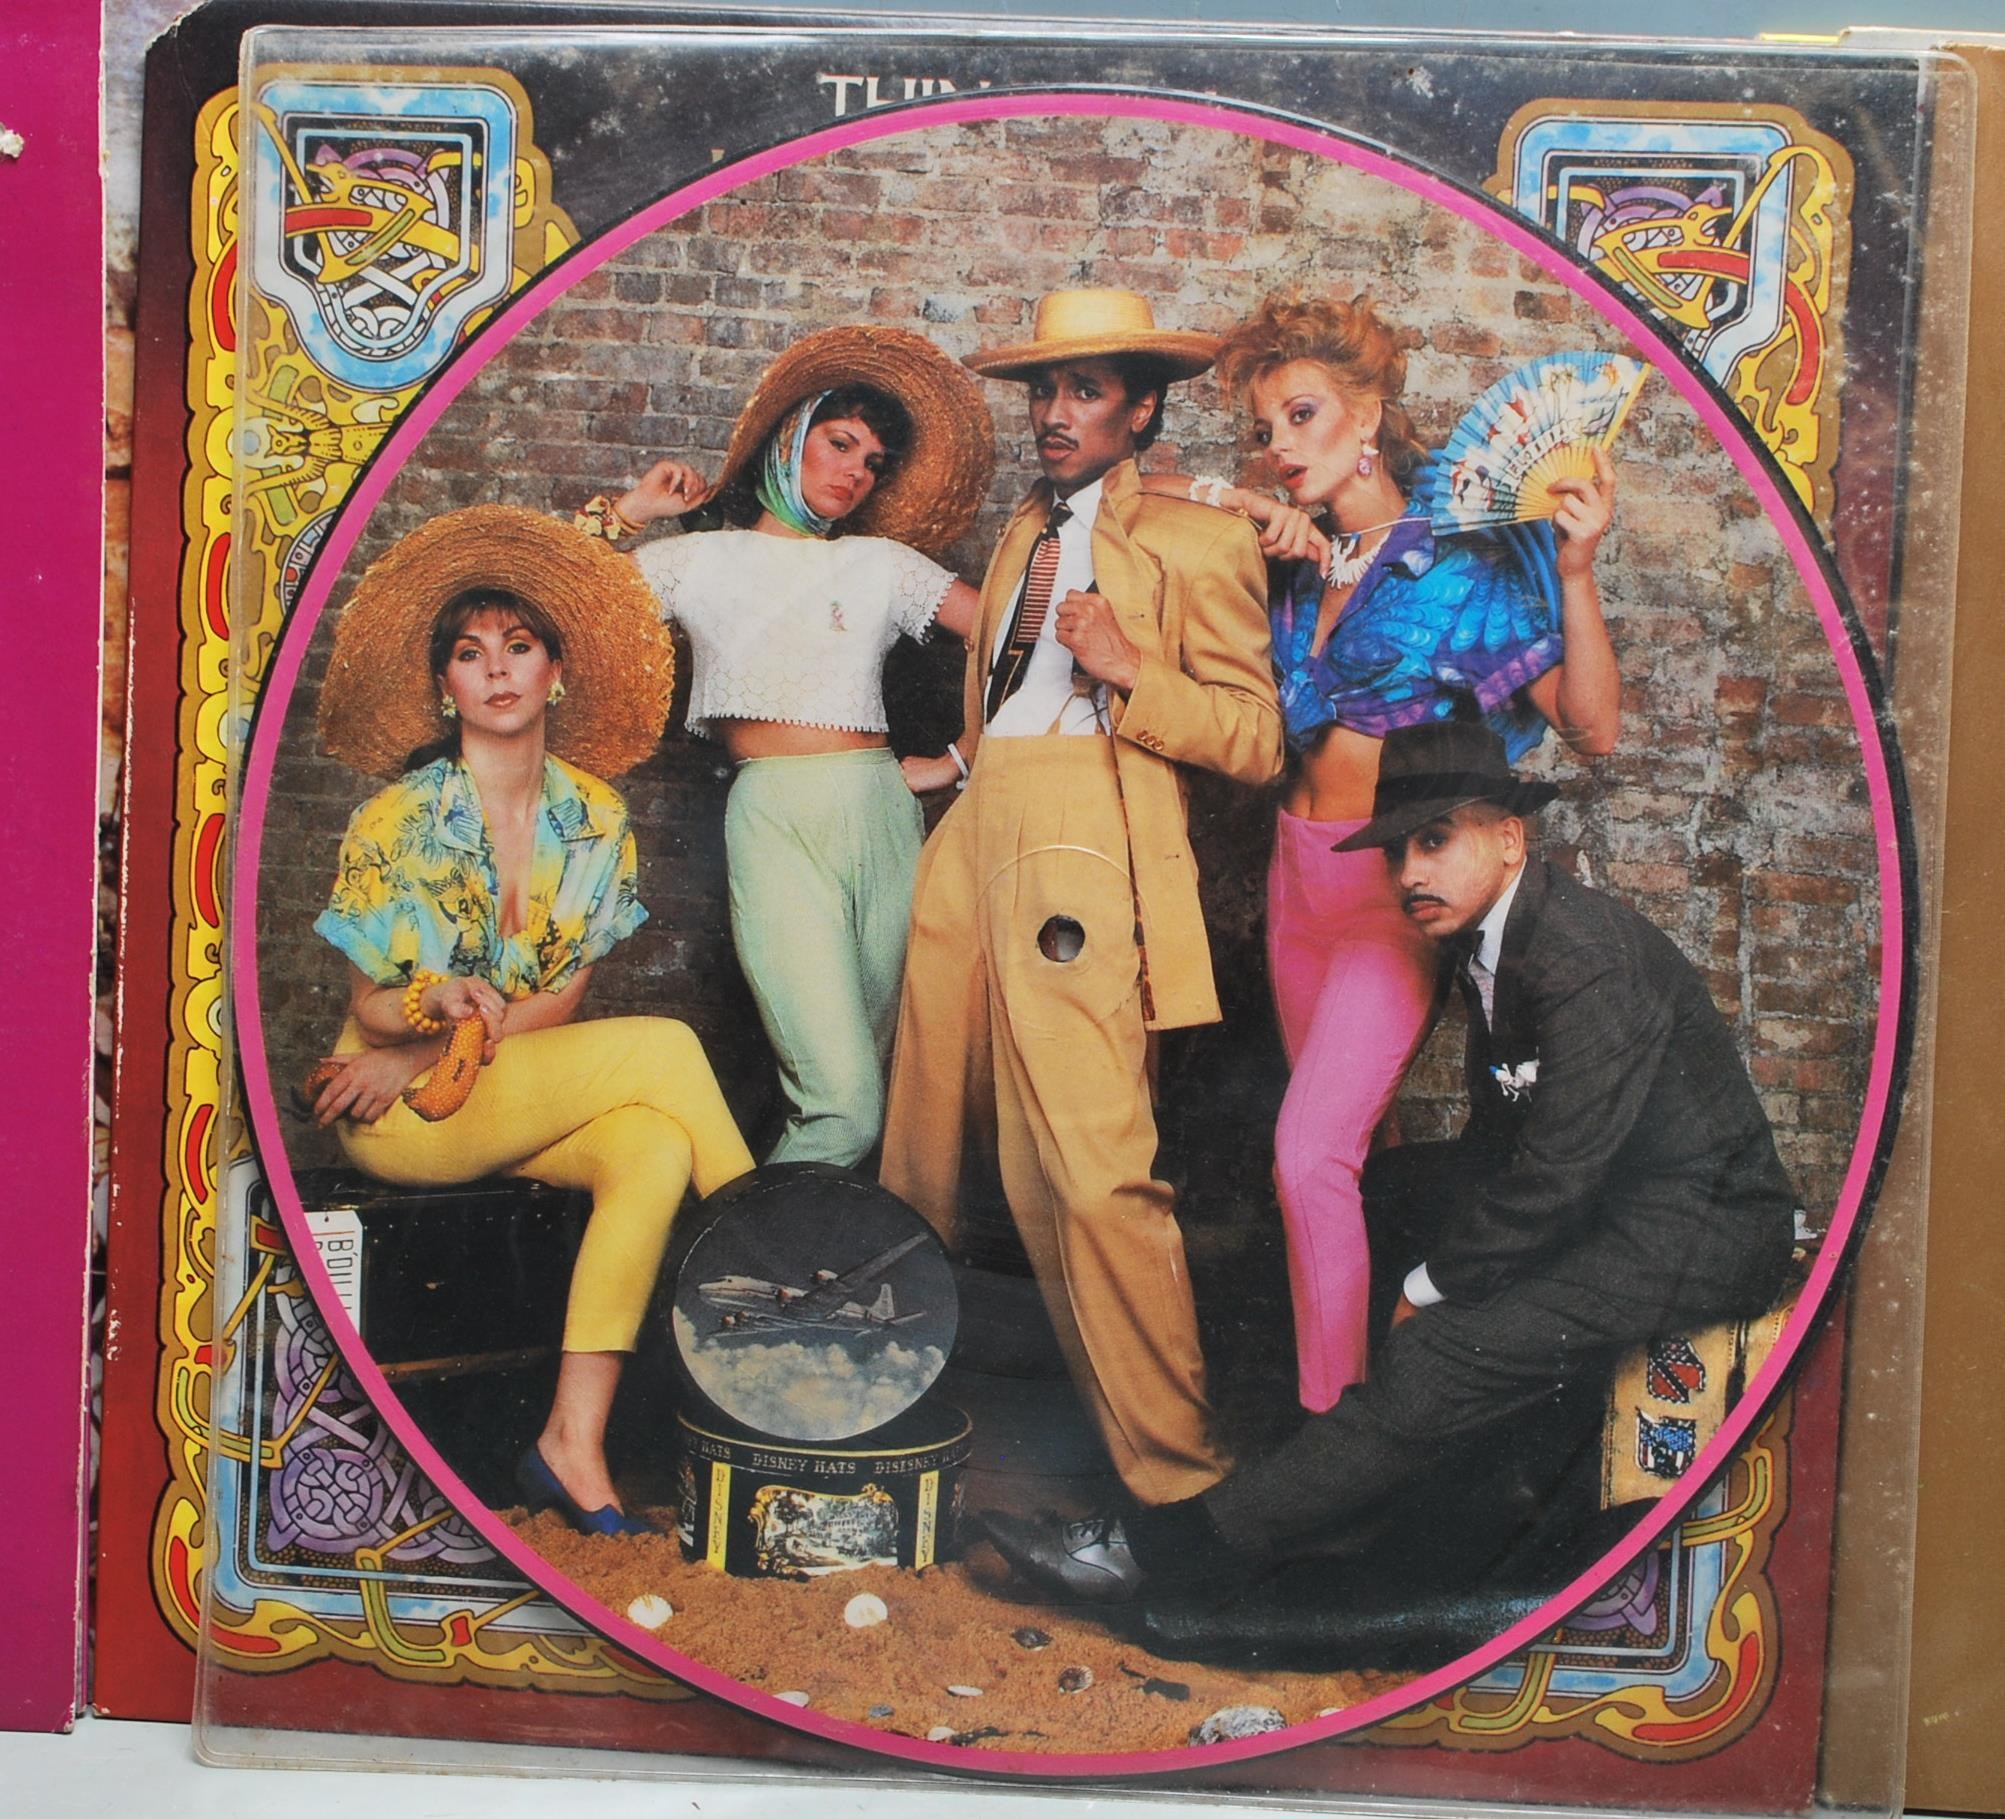 MIXED GROUP OF TEN VINYL LONG PLAY RECORD ALBUMS - Image 7 of 7